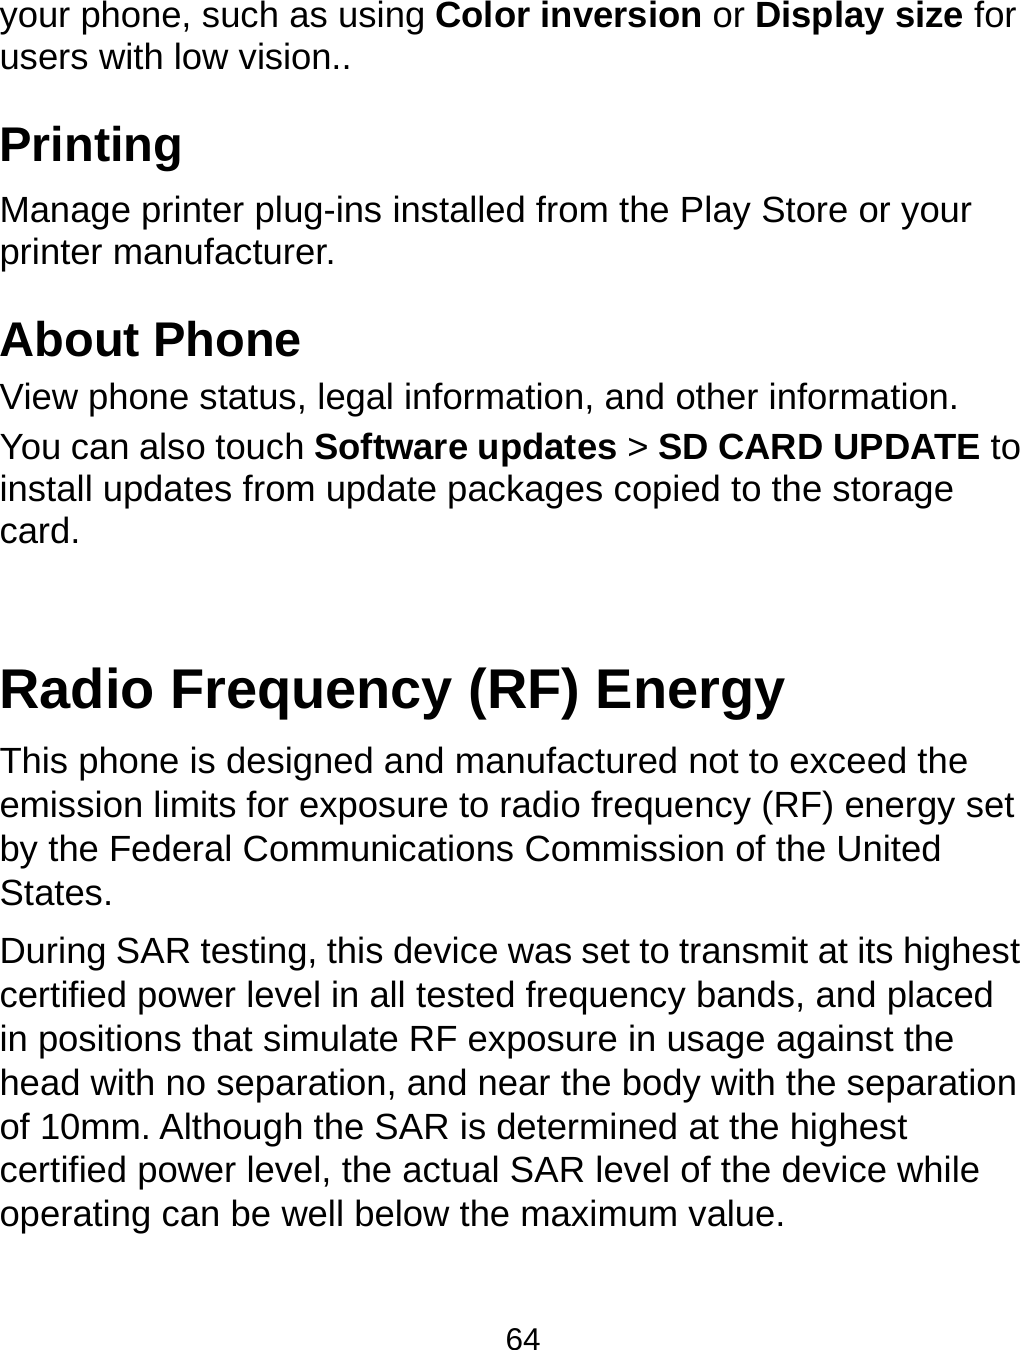  64 your phone, such as using Color inversion or Display size for users with low vision.. Printing Manage printer plug-ins installed from the Play Store or your printer manufacturer. About Phone View phone status, legal information, and other information. You can also touch Software updates &gt; SD CARD UPDATE to install updates from update packages copied to the storage card.  Radio Frequency (RF) Energy This phone is designed and manufactured not to exceed the emission limits for exposure to radio frequency (RF) energy set by the Federal Communications Commission of the United States. During SAR testing, this device was set to transmit at its highest certified power level in all tested frequency bands, and placed in positions that simulate RF exposure in usage against the head with no separation, and near the body with the separation of 10mm. Although the SAR is determined at the highest certified power level, the actual SAR level of the device while operating can be well below the maximum value.   